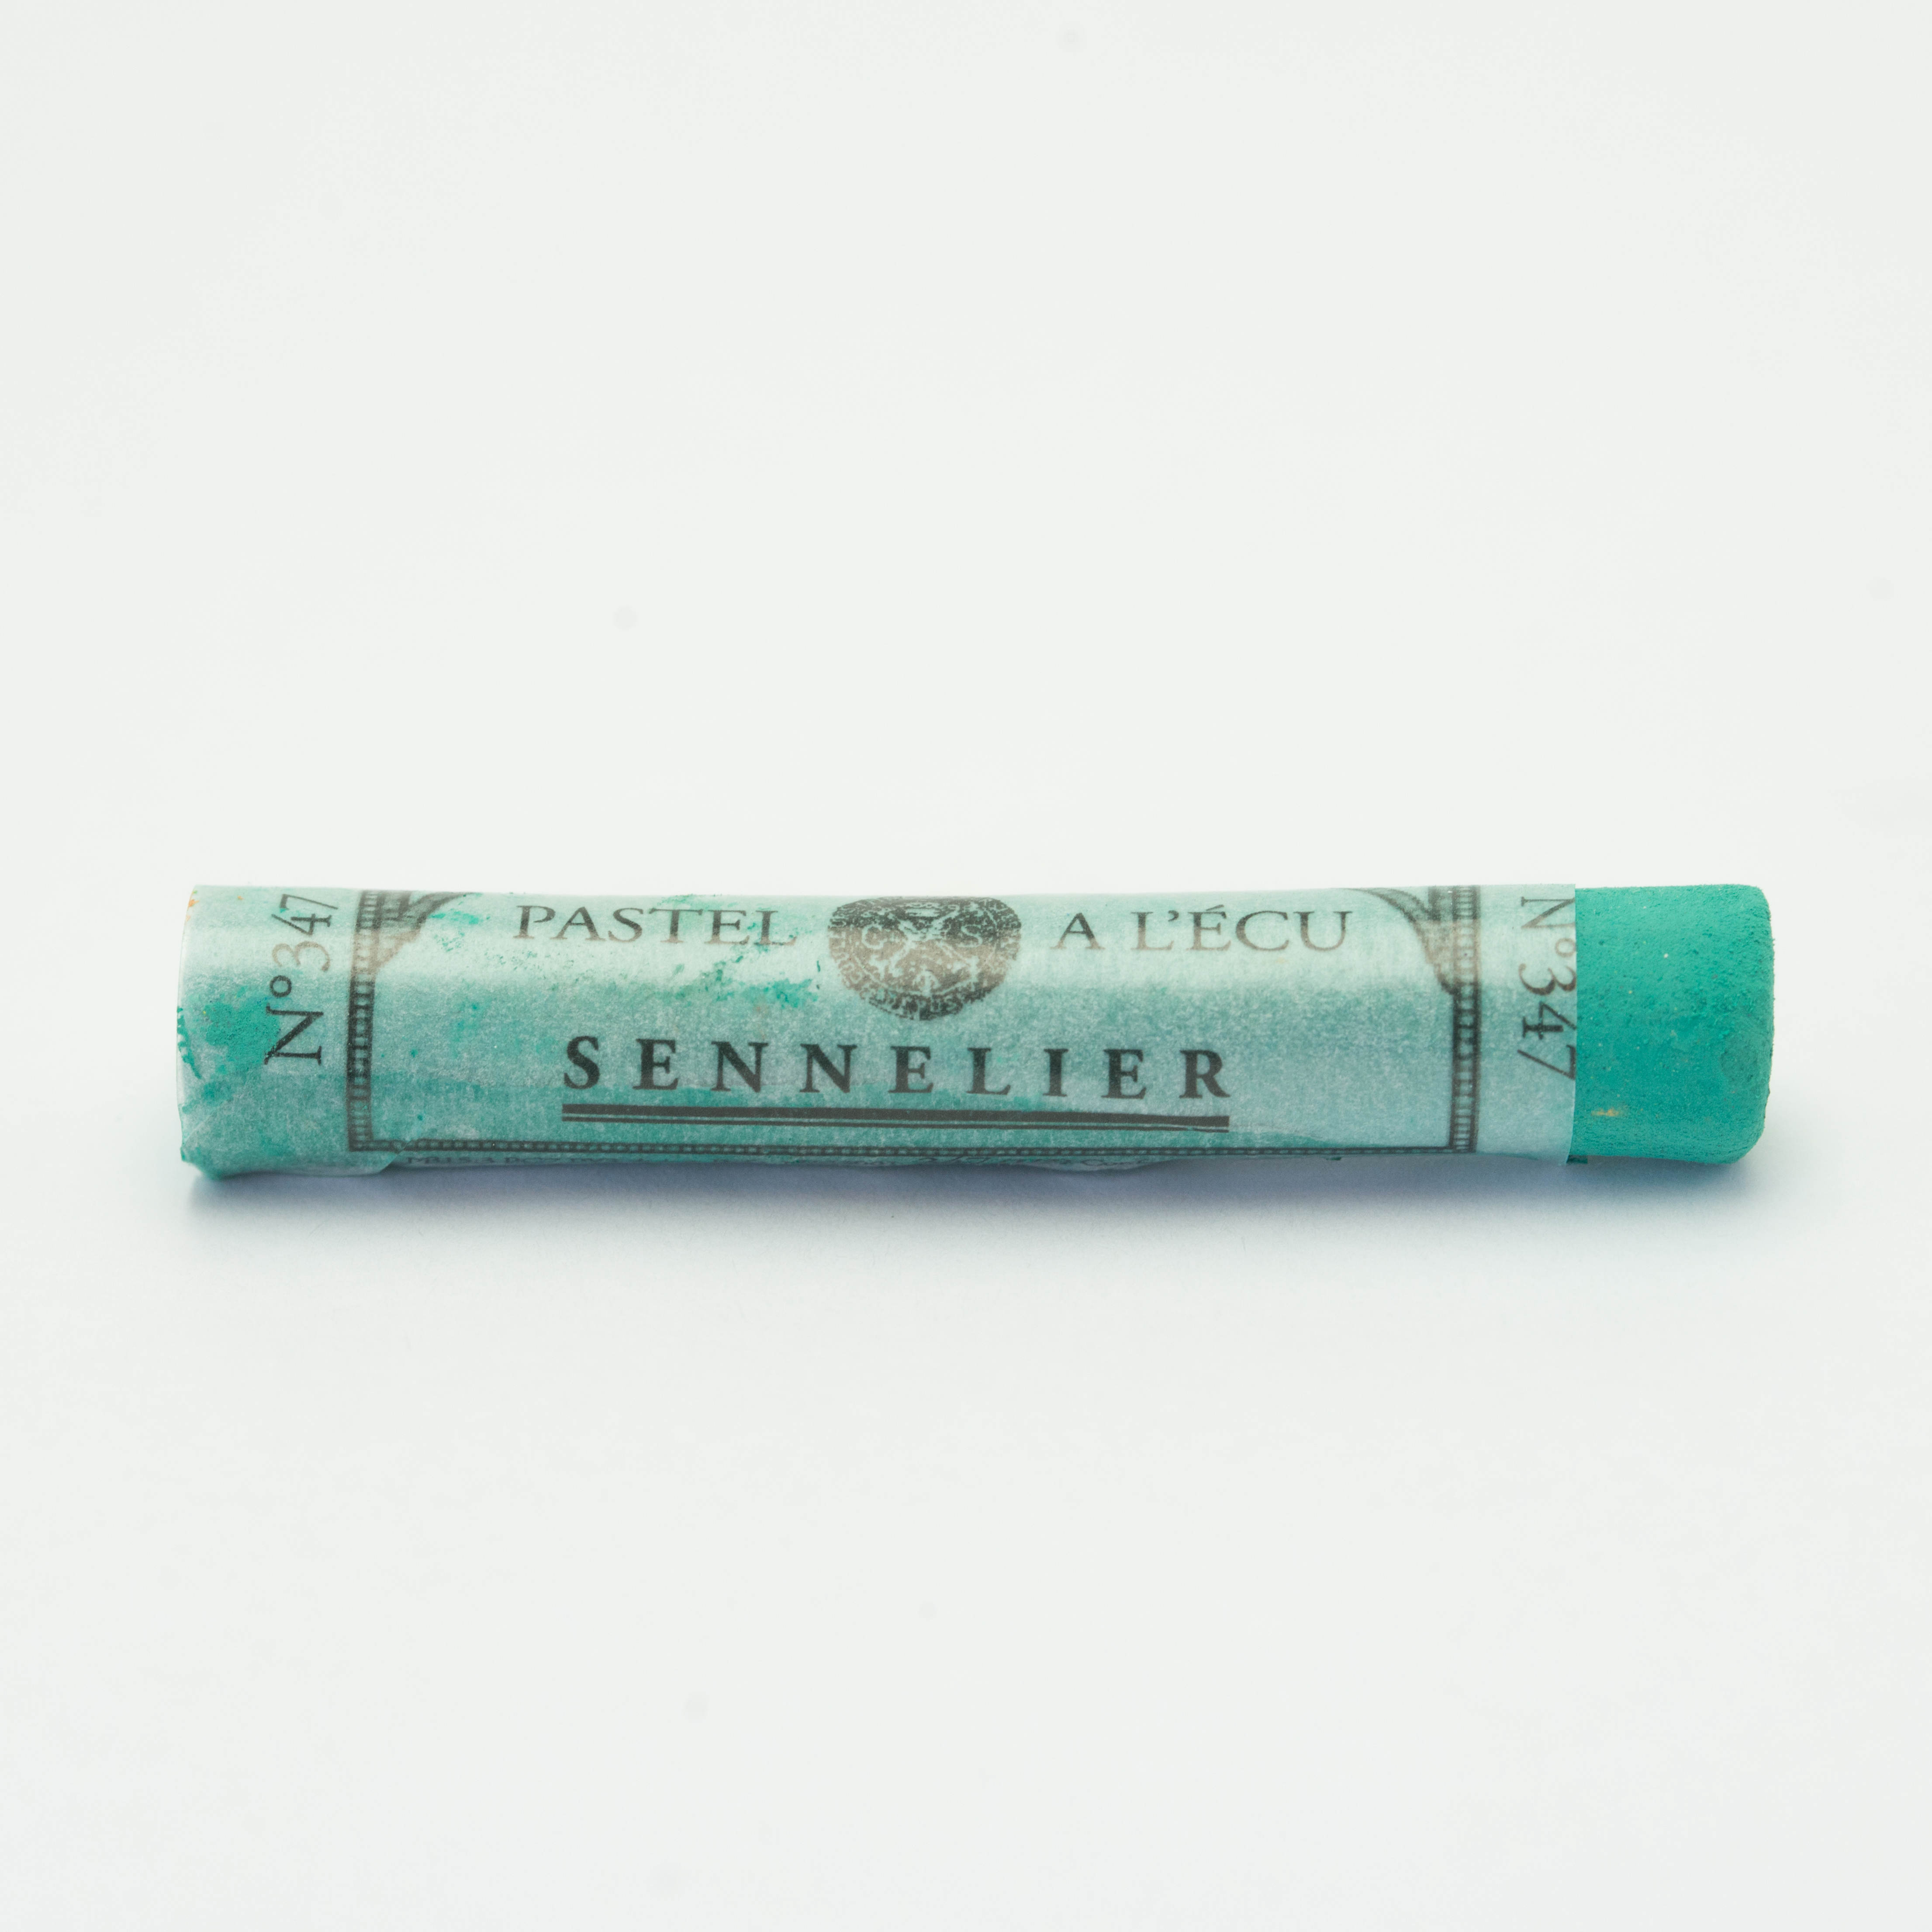 Sennelier Extra Soft Pastels - Cinereous Green 347